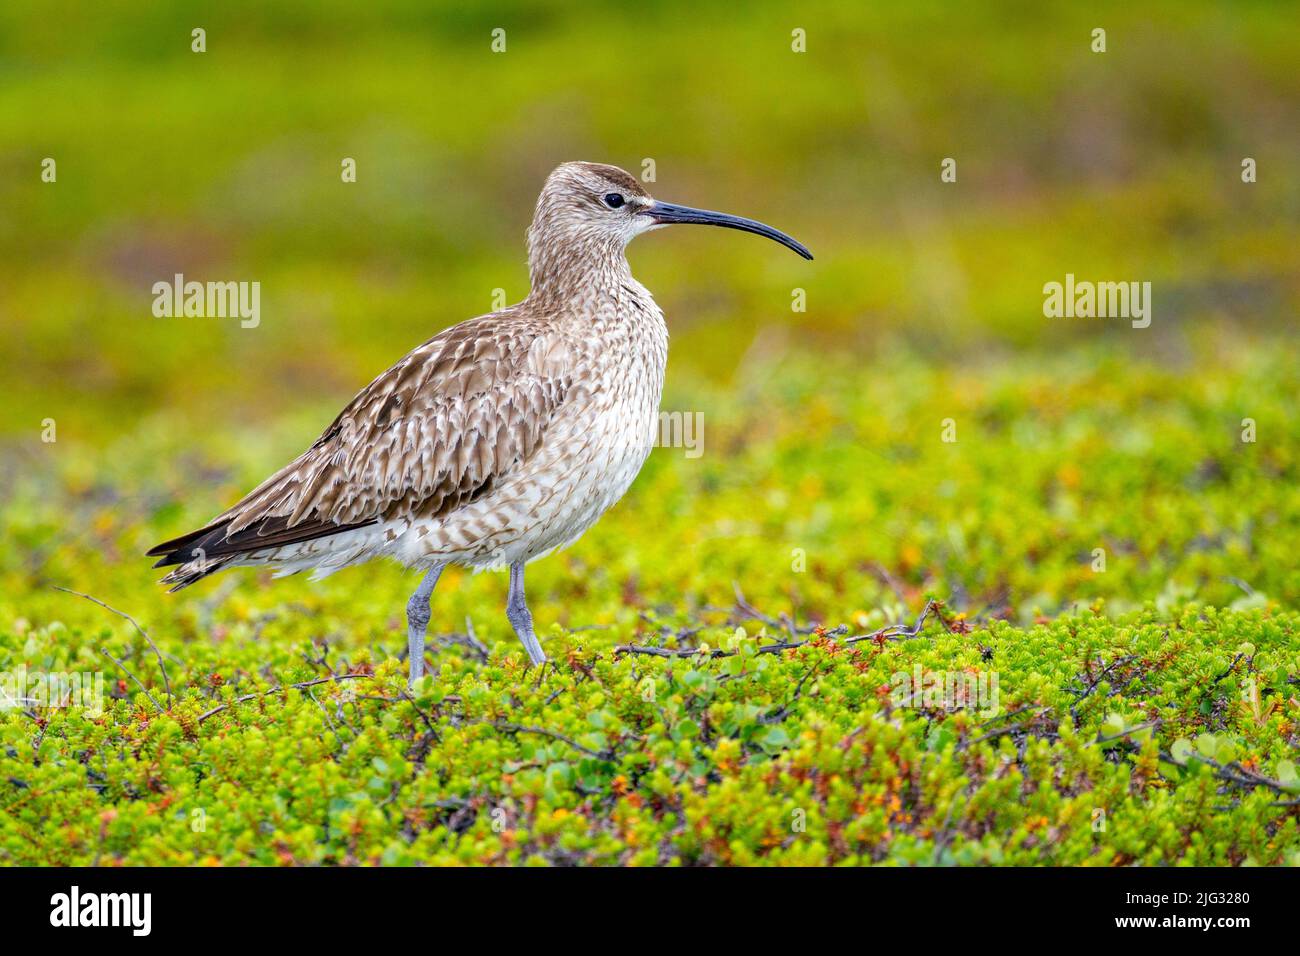 whimbrel (Numenius phaeopus), standing on a ground cover, side view, Norway Stock Photo